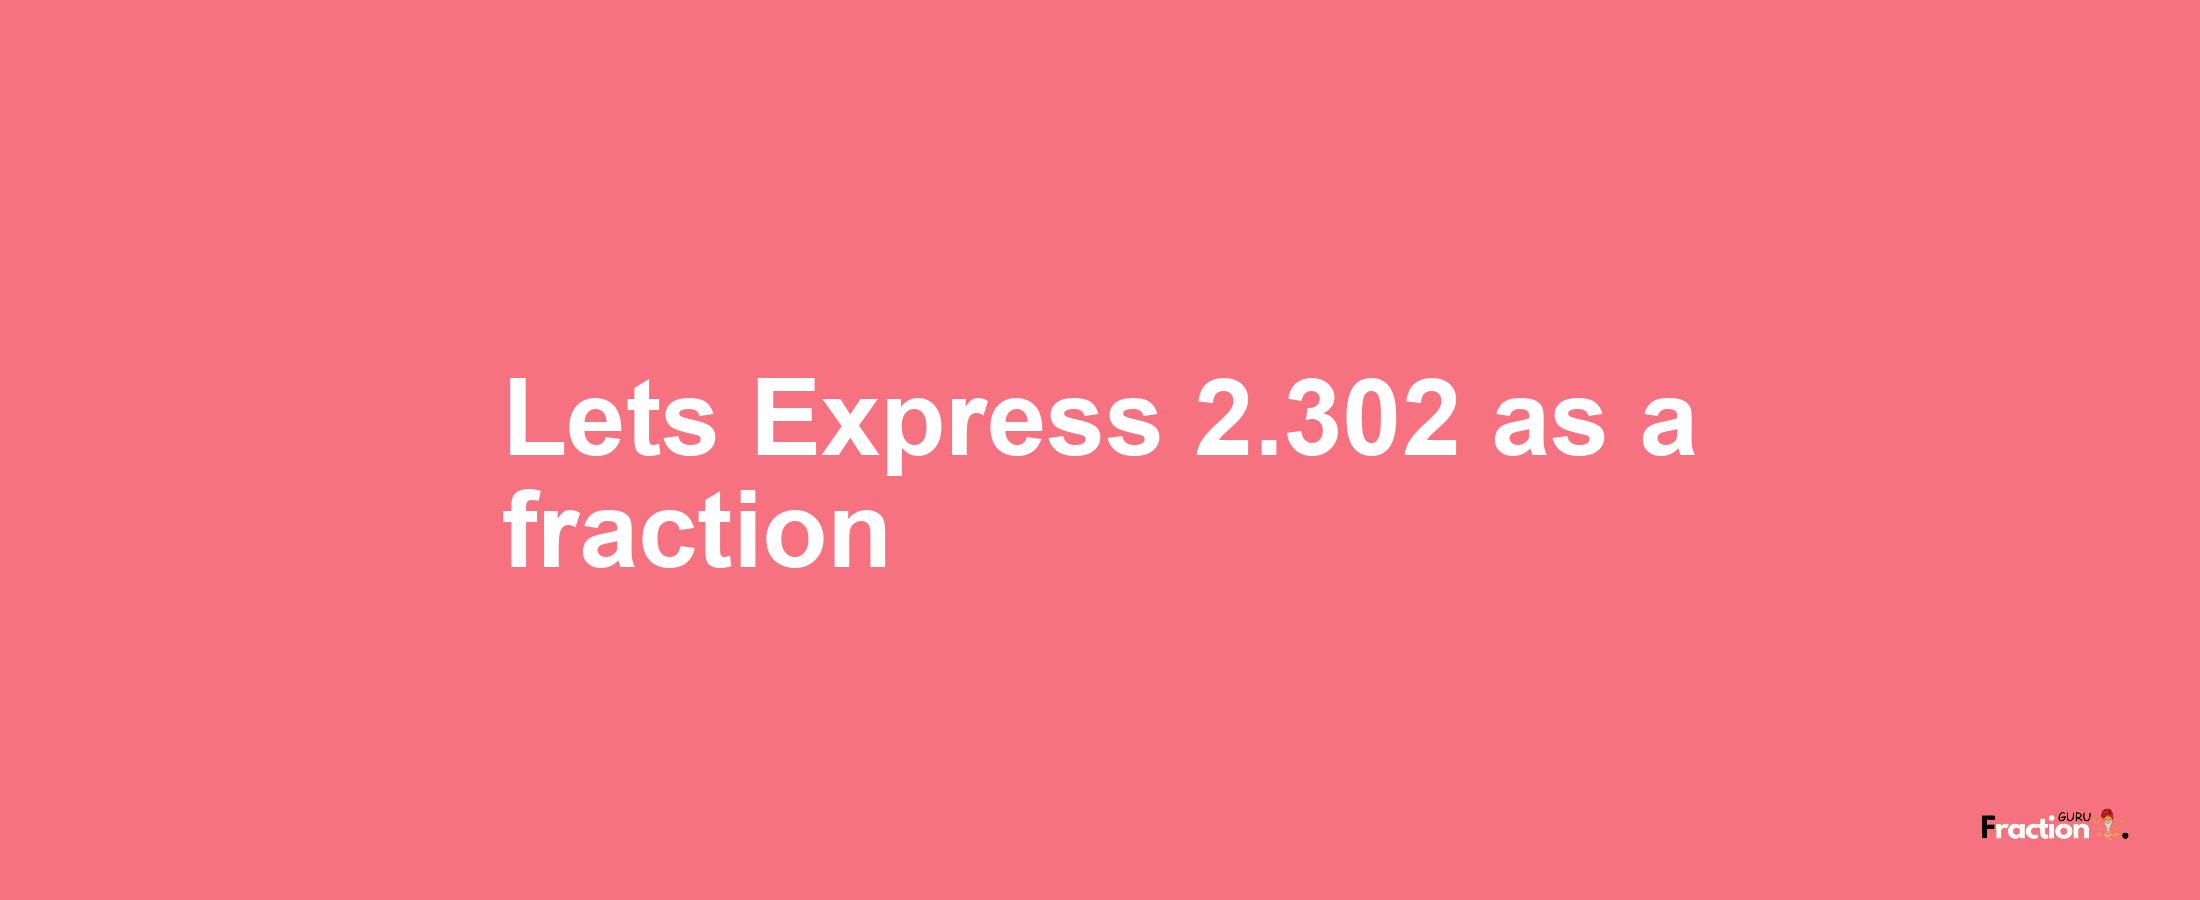 Lets Express 2.302 as afraction